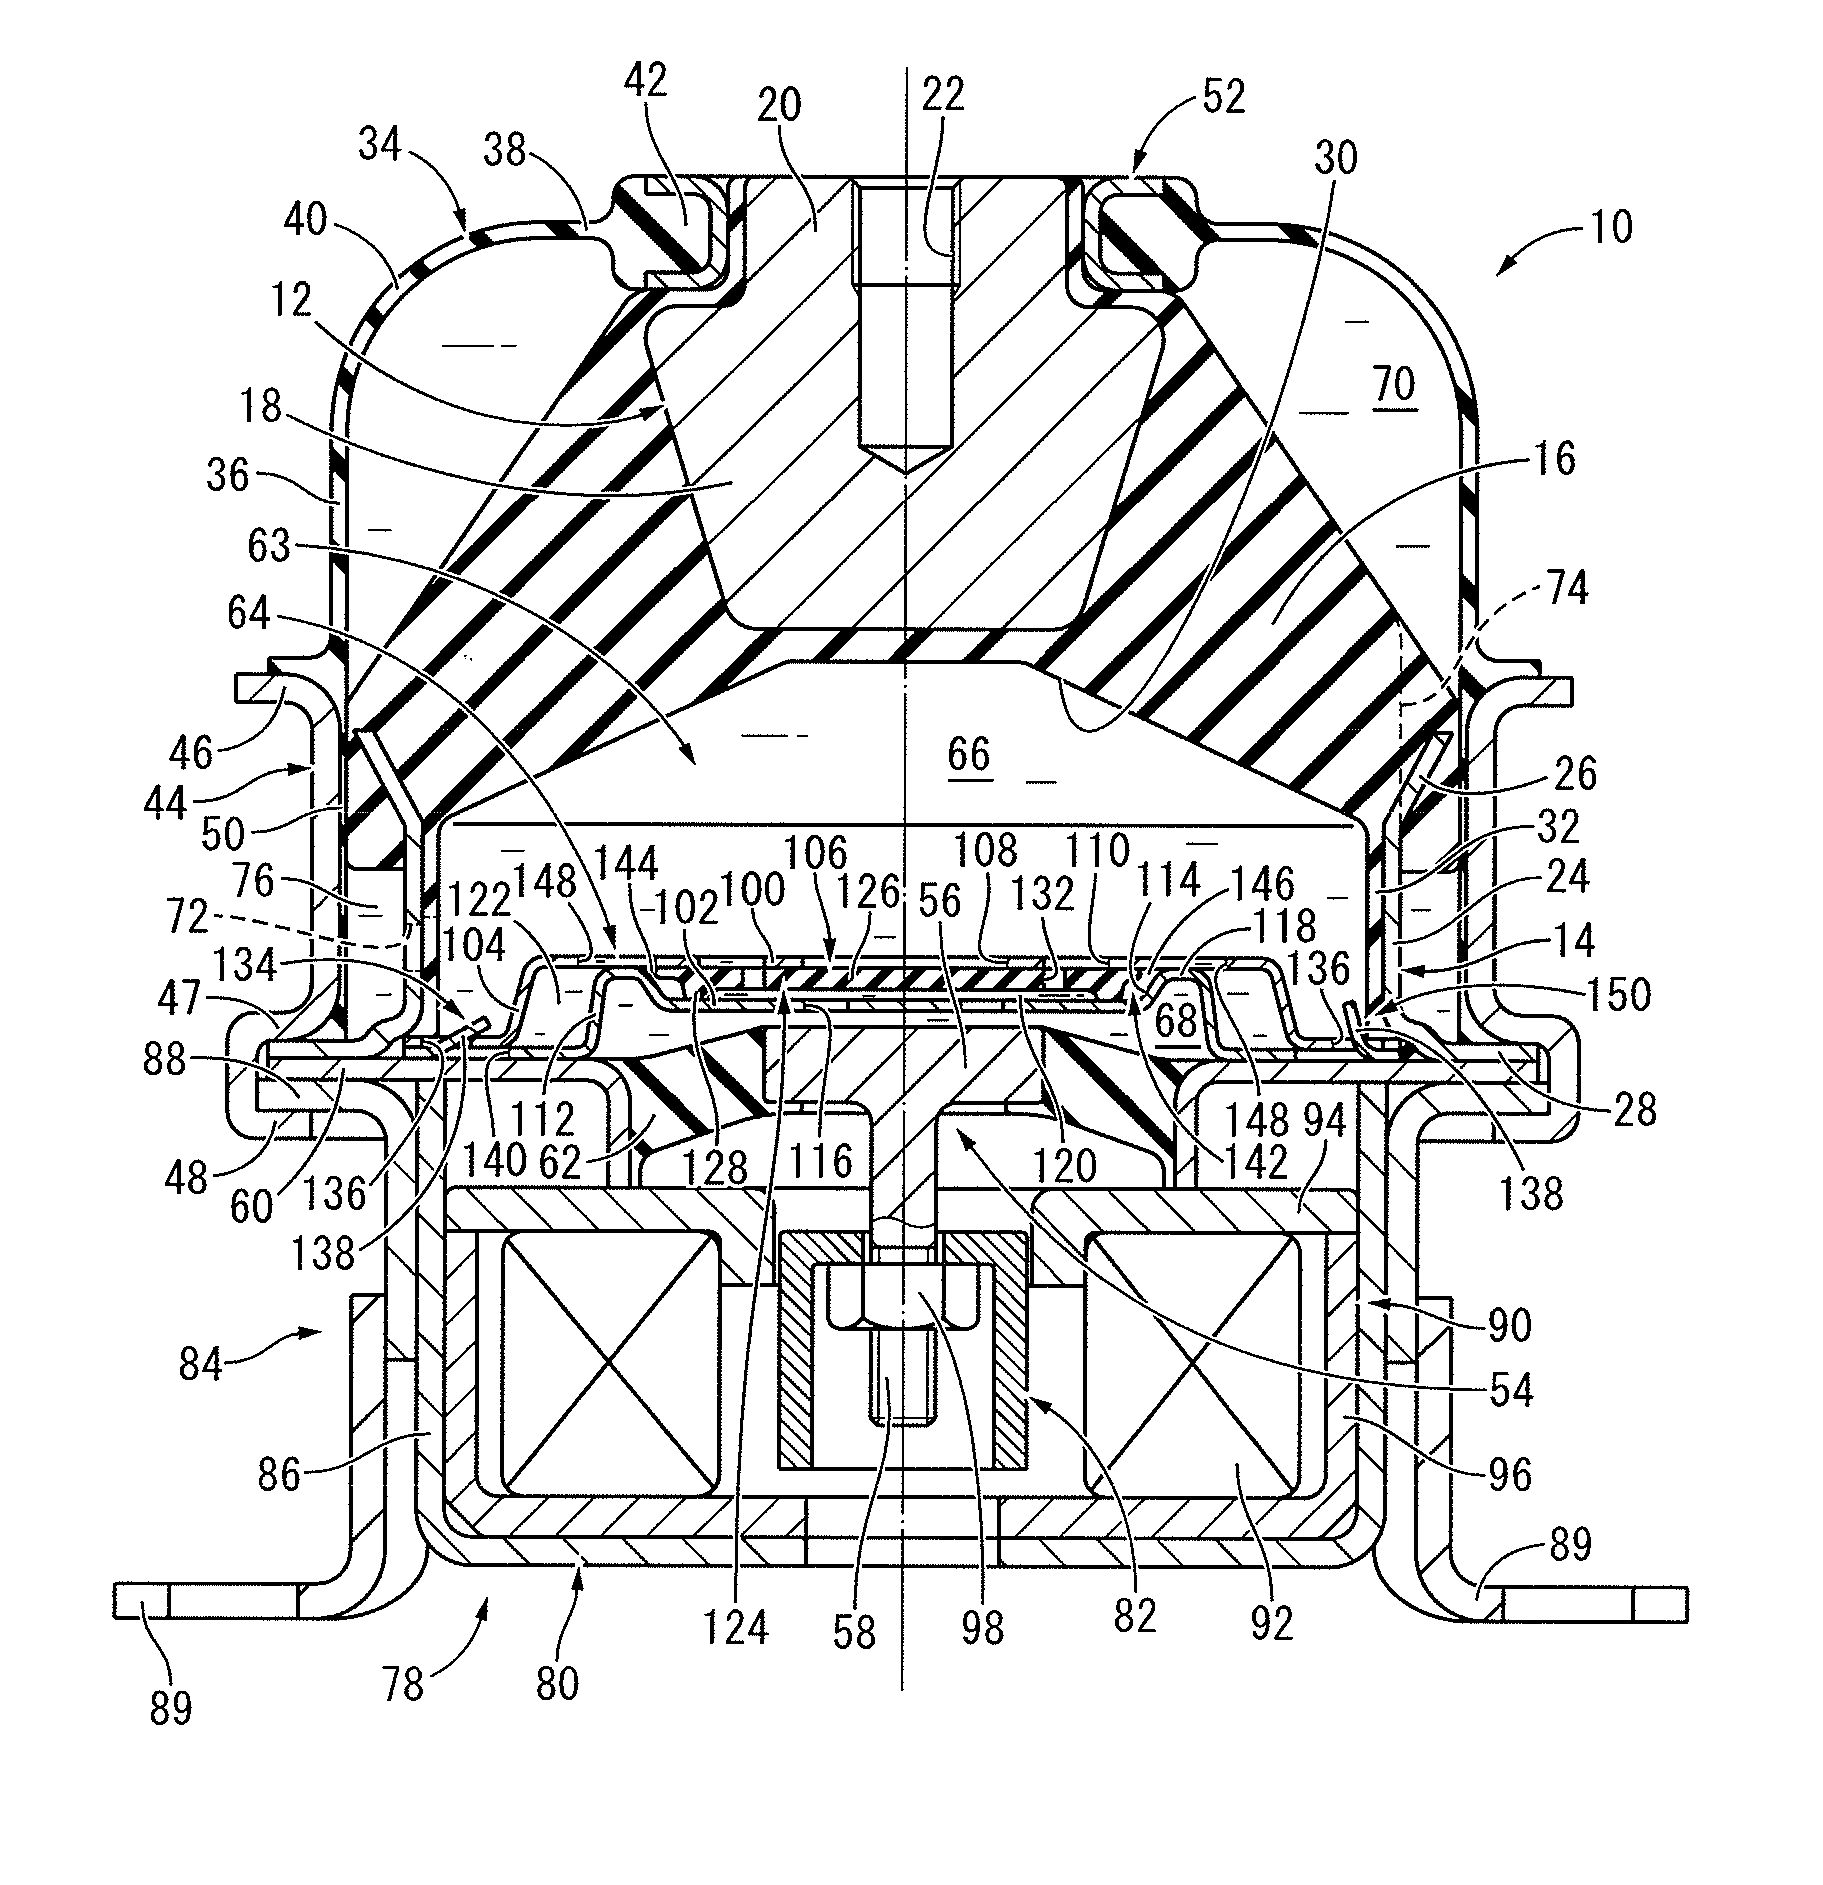 Fluid-filled vibration-damping device